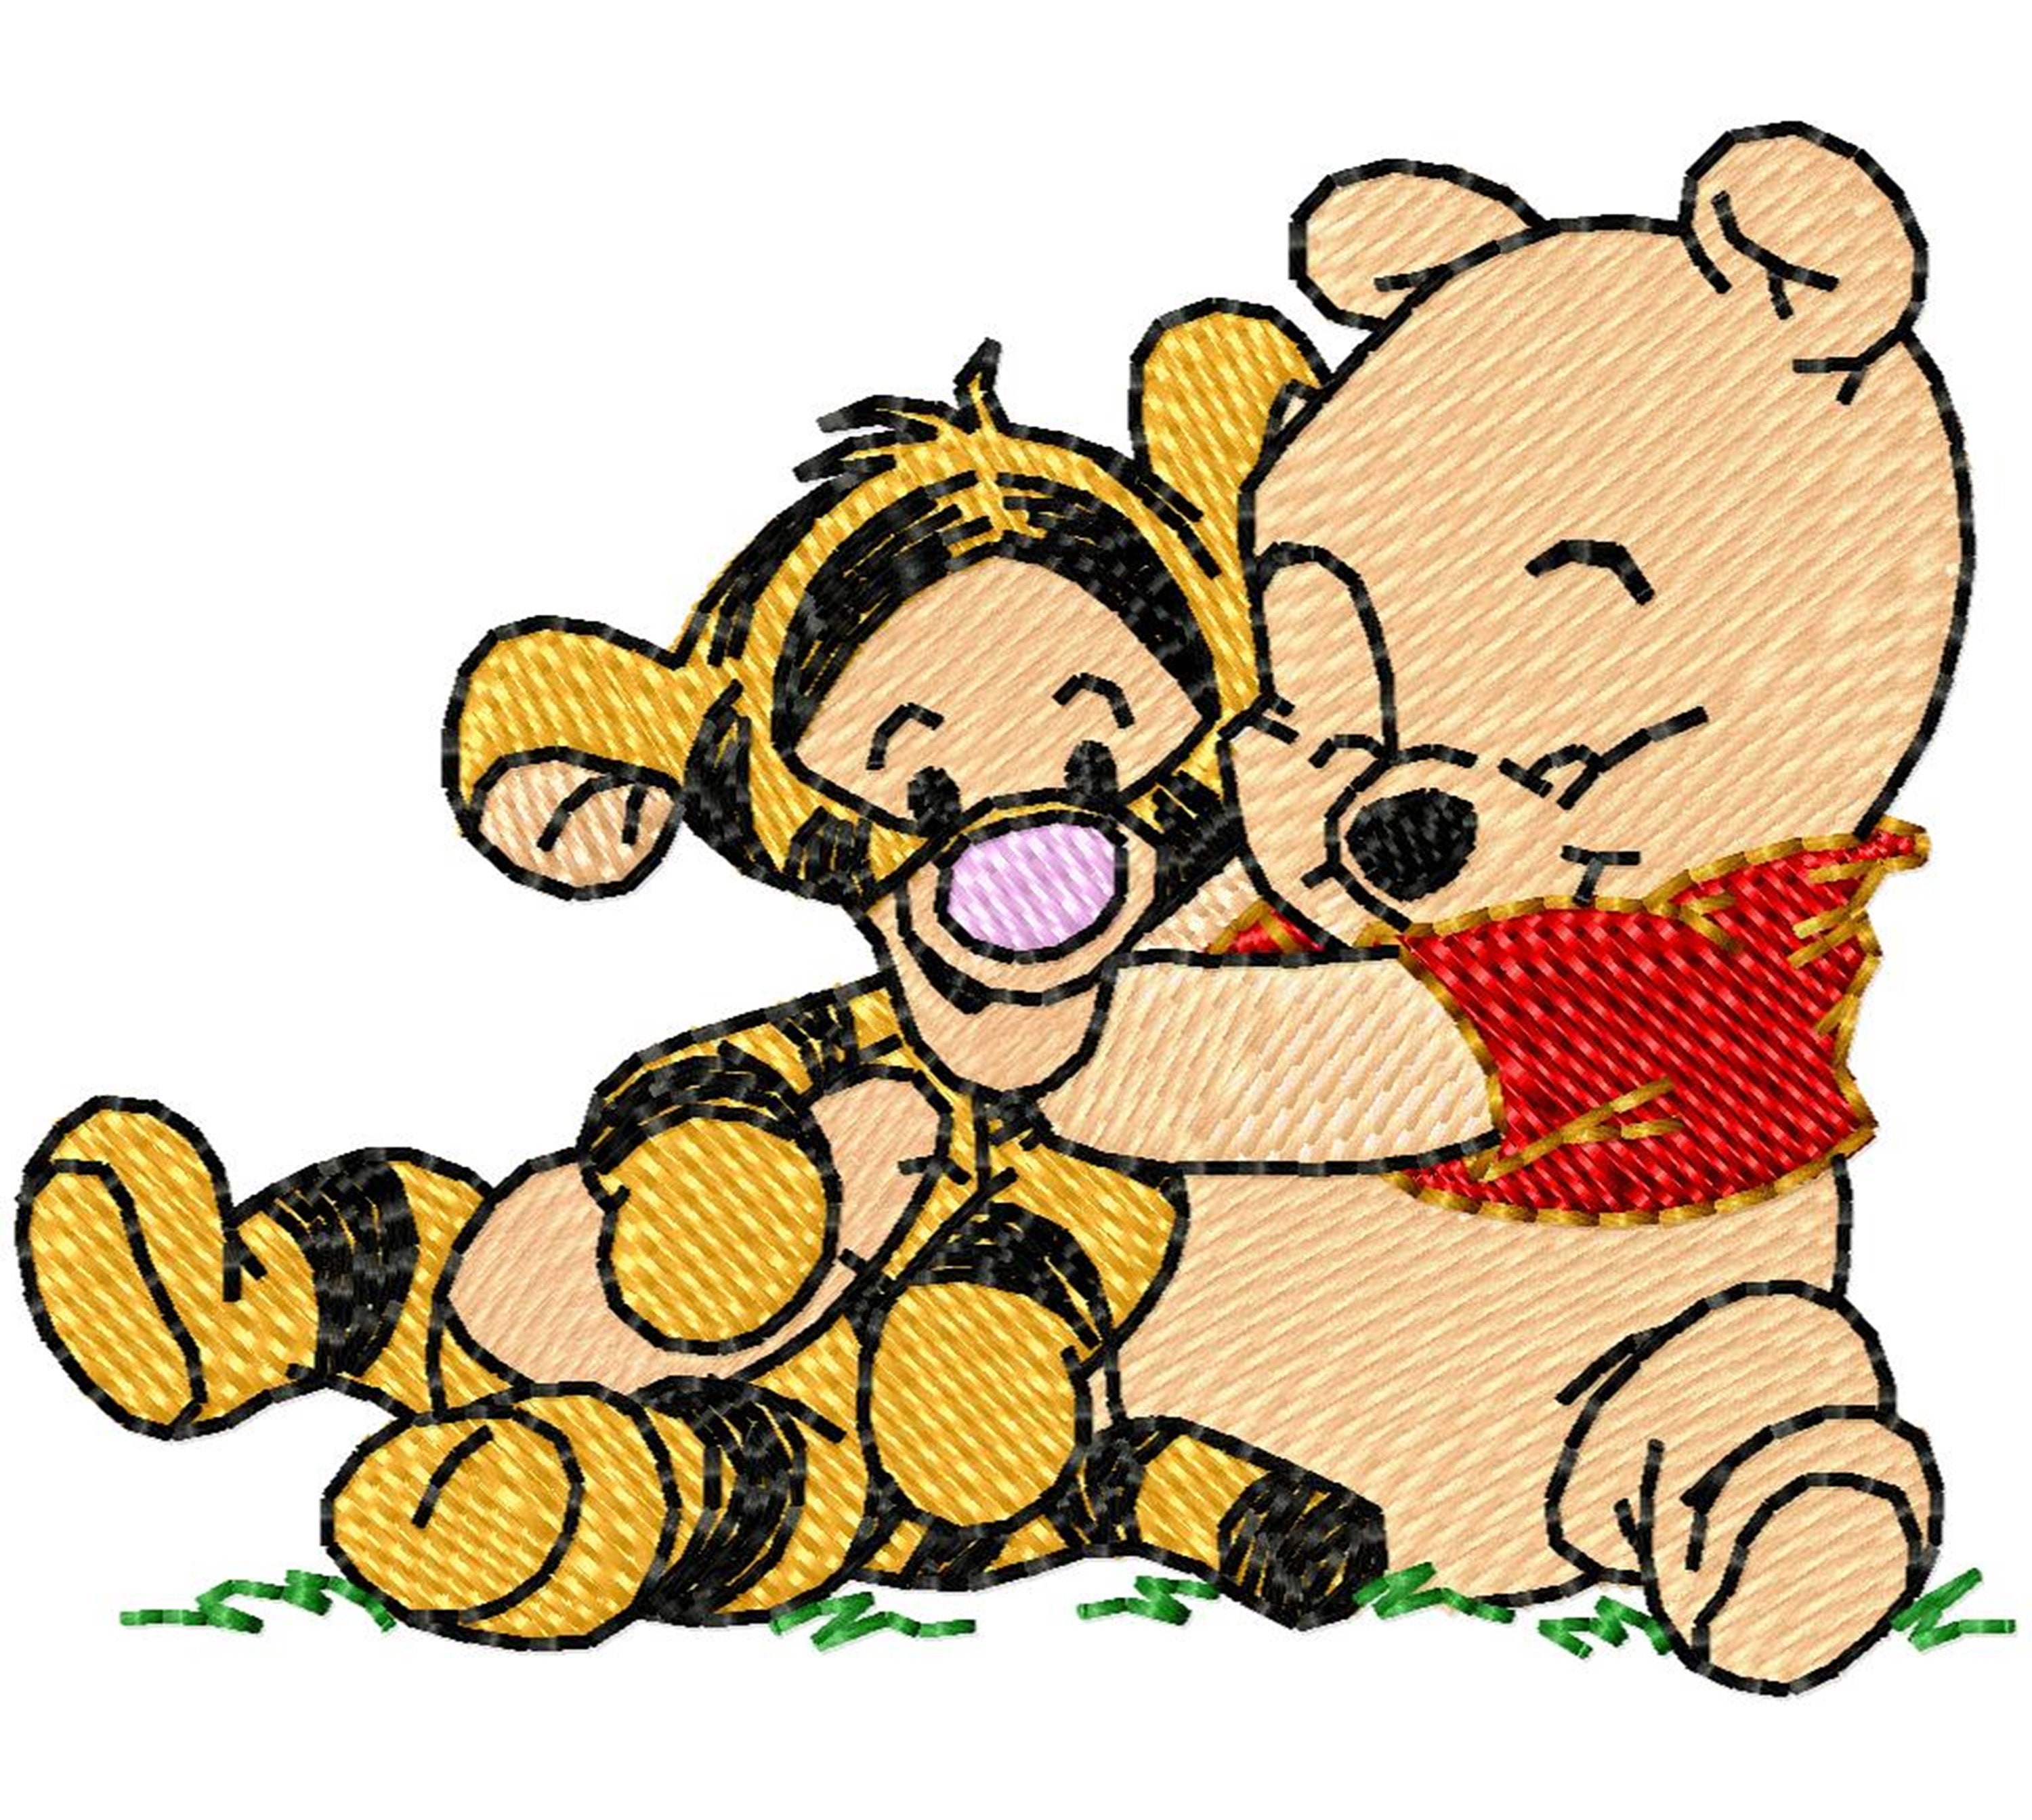  Winnie The Pooh Series Baby Pooh Hugging Baby Tiger Figure  Embroidered Patch Decorative Applique